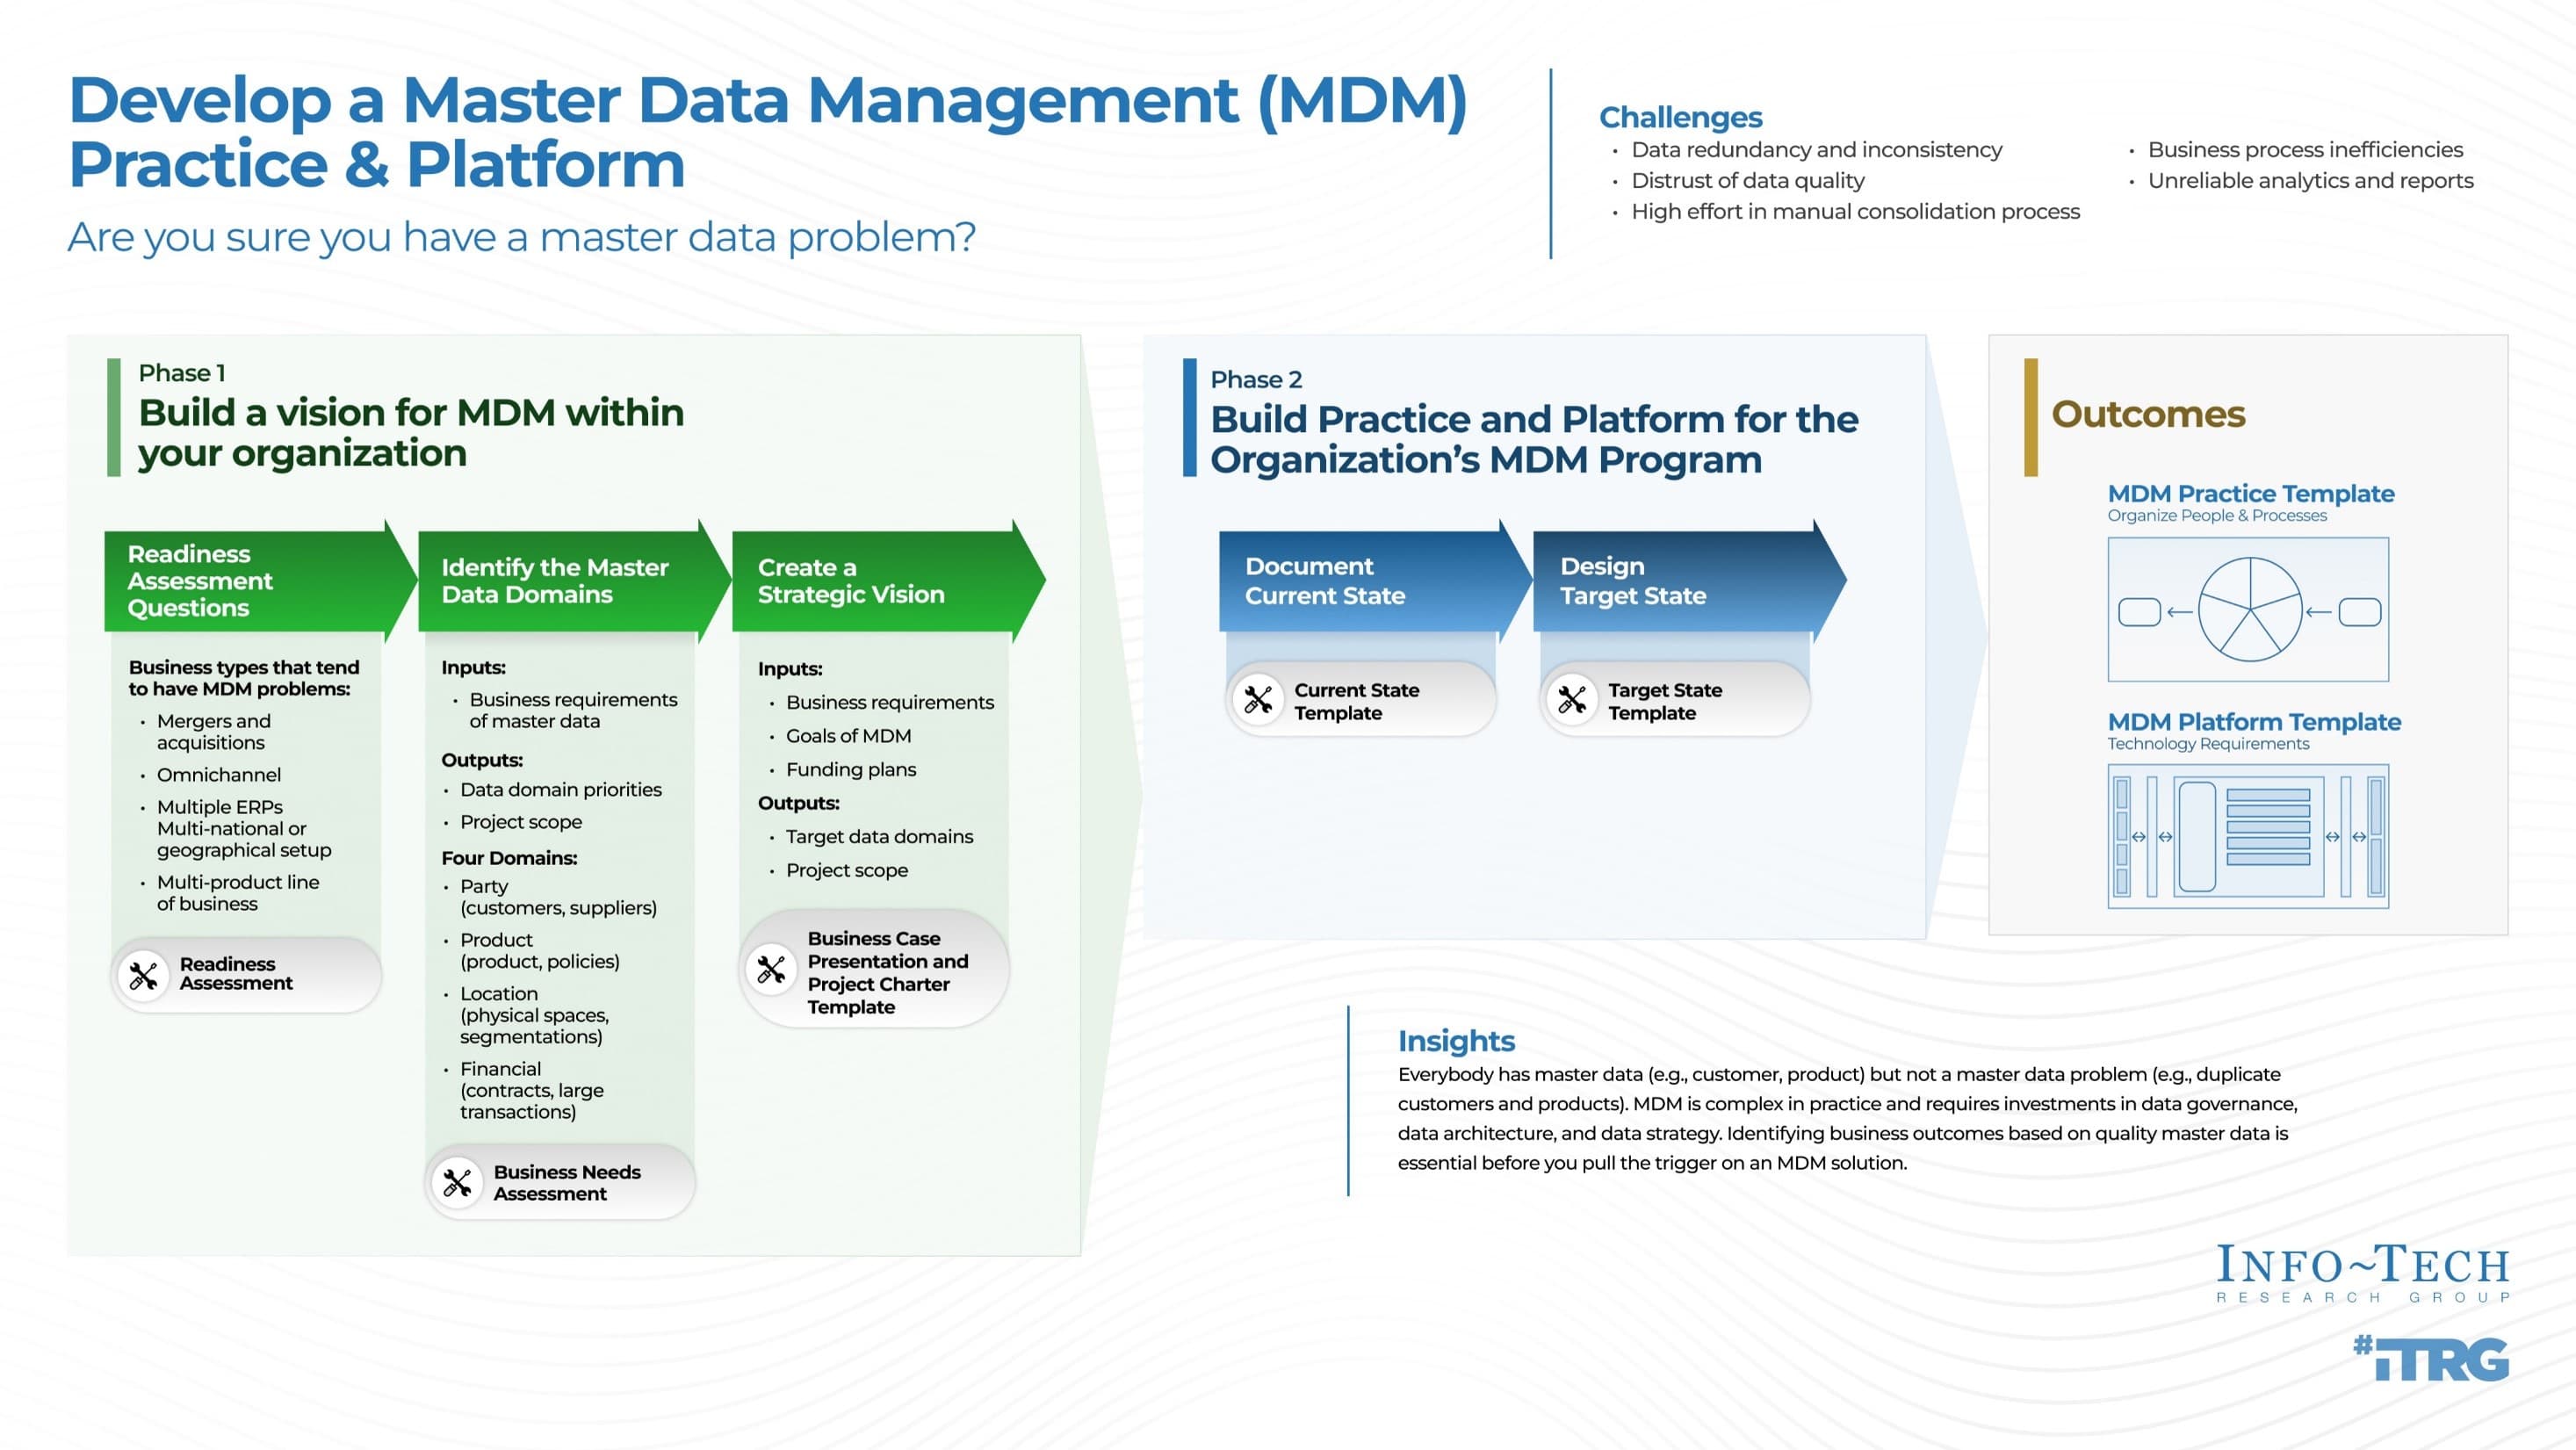 The image contains an Info-Tech Thought Model of the Develop a Master Data Management Practice & Platform.